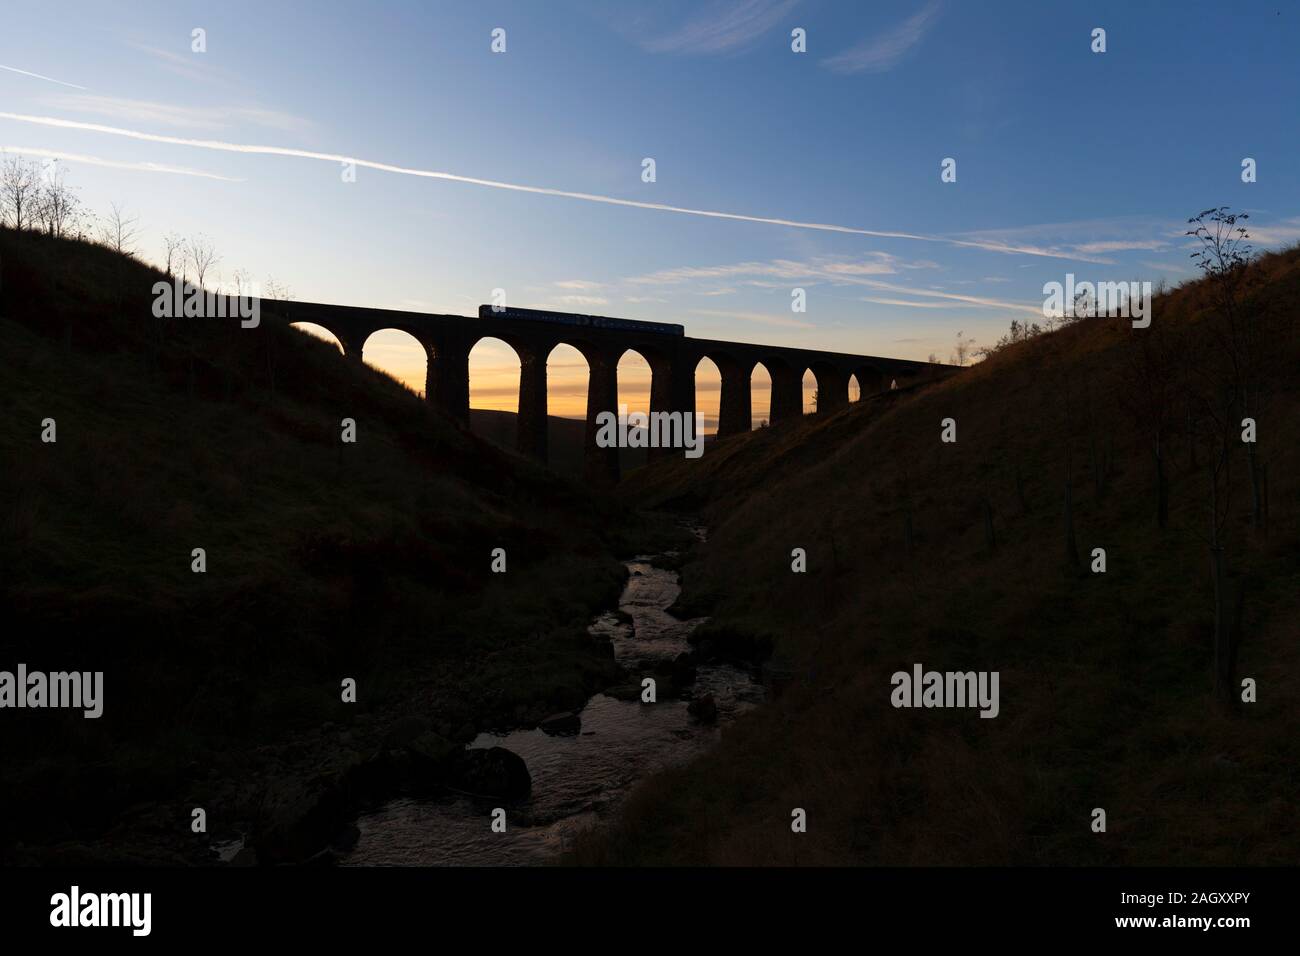 Arriva Northern rail class 158 sprinter train crossing Arten gill viaduct, on the Settle to Carlisle railway at sunset making a silhouette Stock Photo